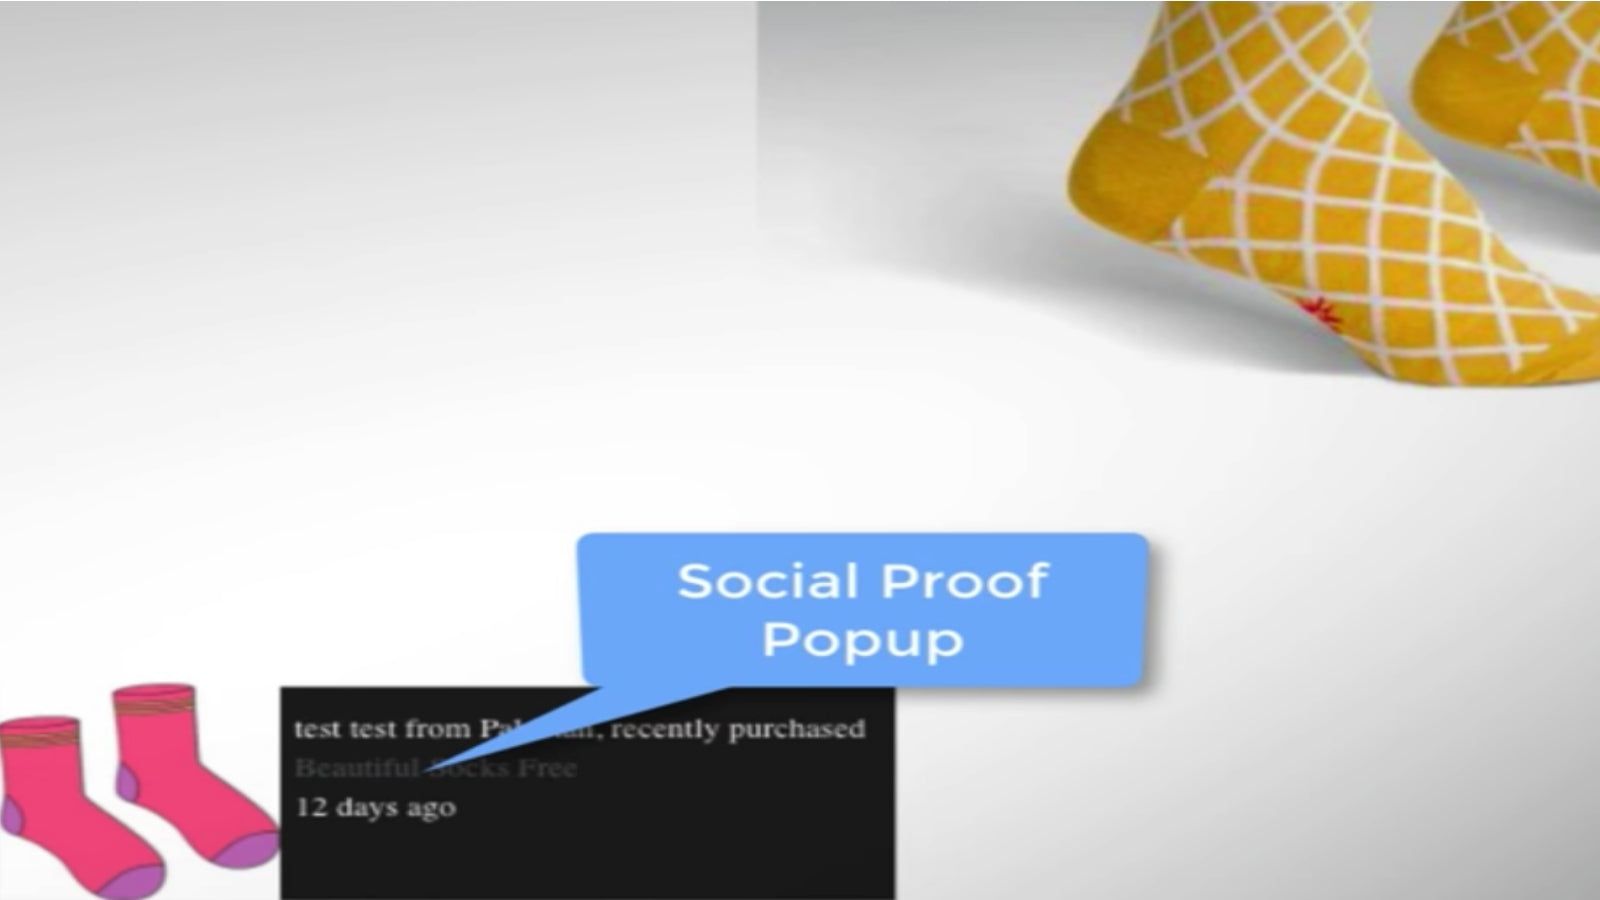 Social Proof Products Purchased By - Pop Up